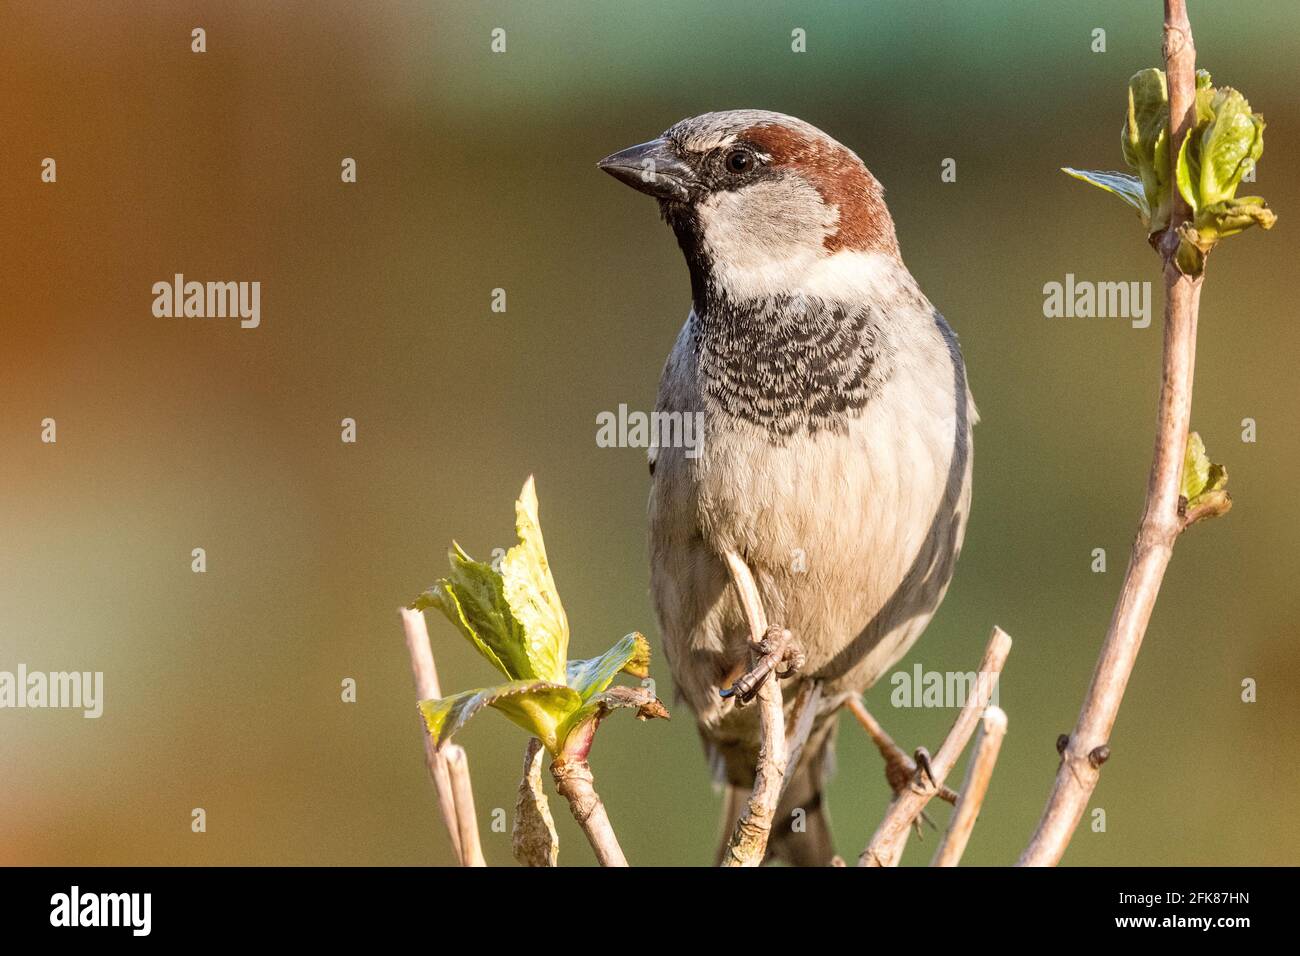 Male house sparrow sitting on a branch Stock Photo